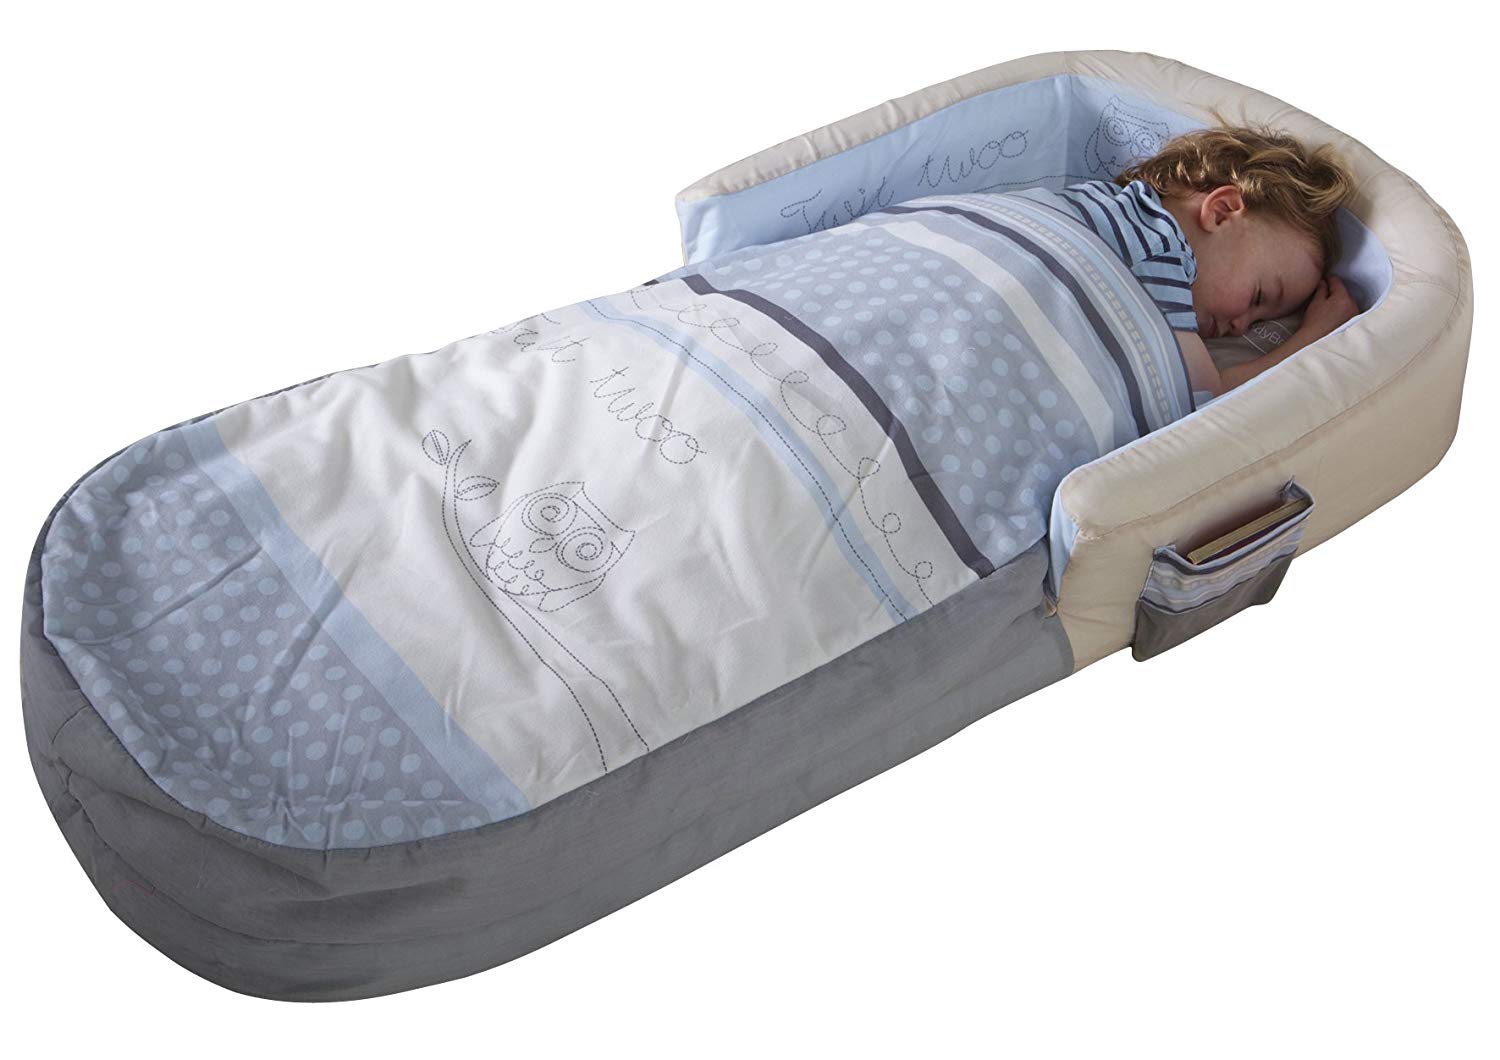 inflatable mattress or sleeping cot